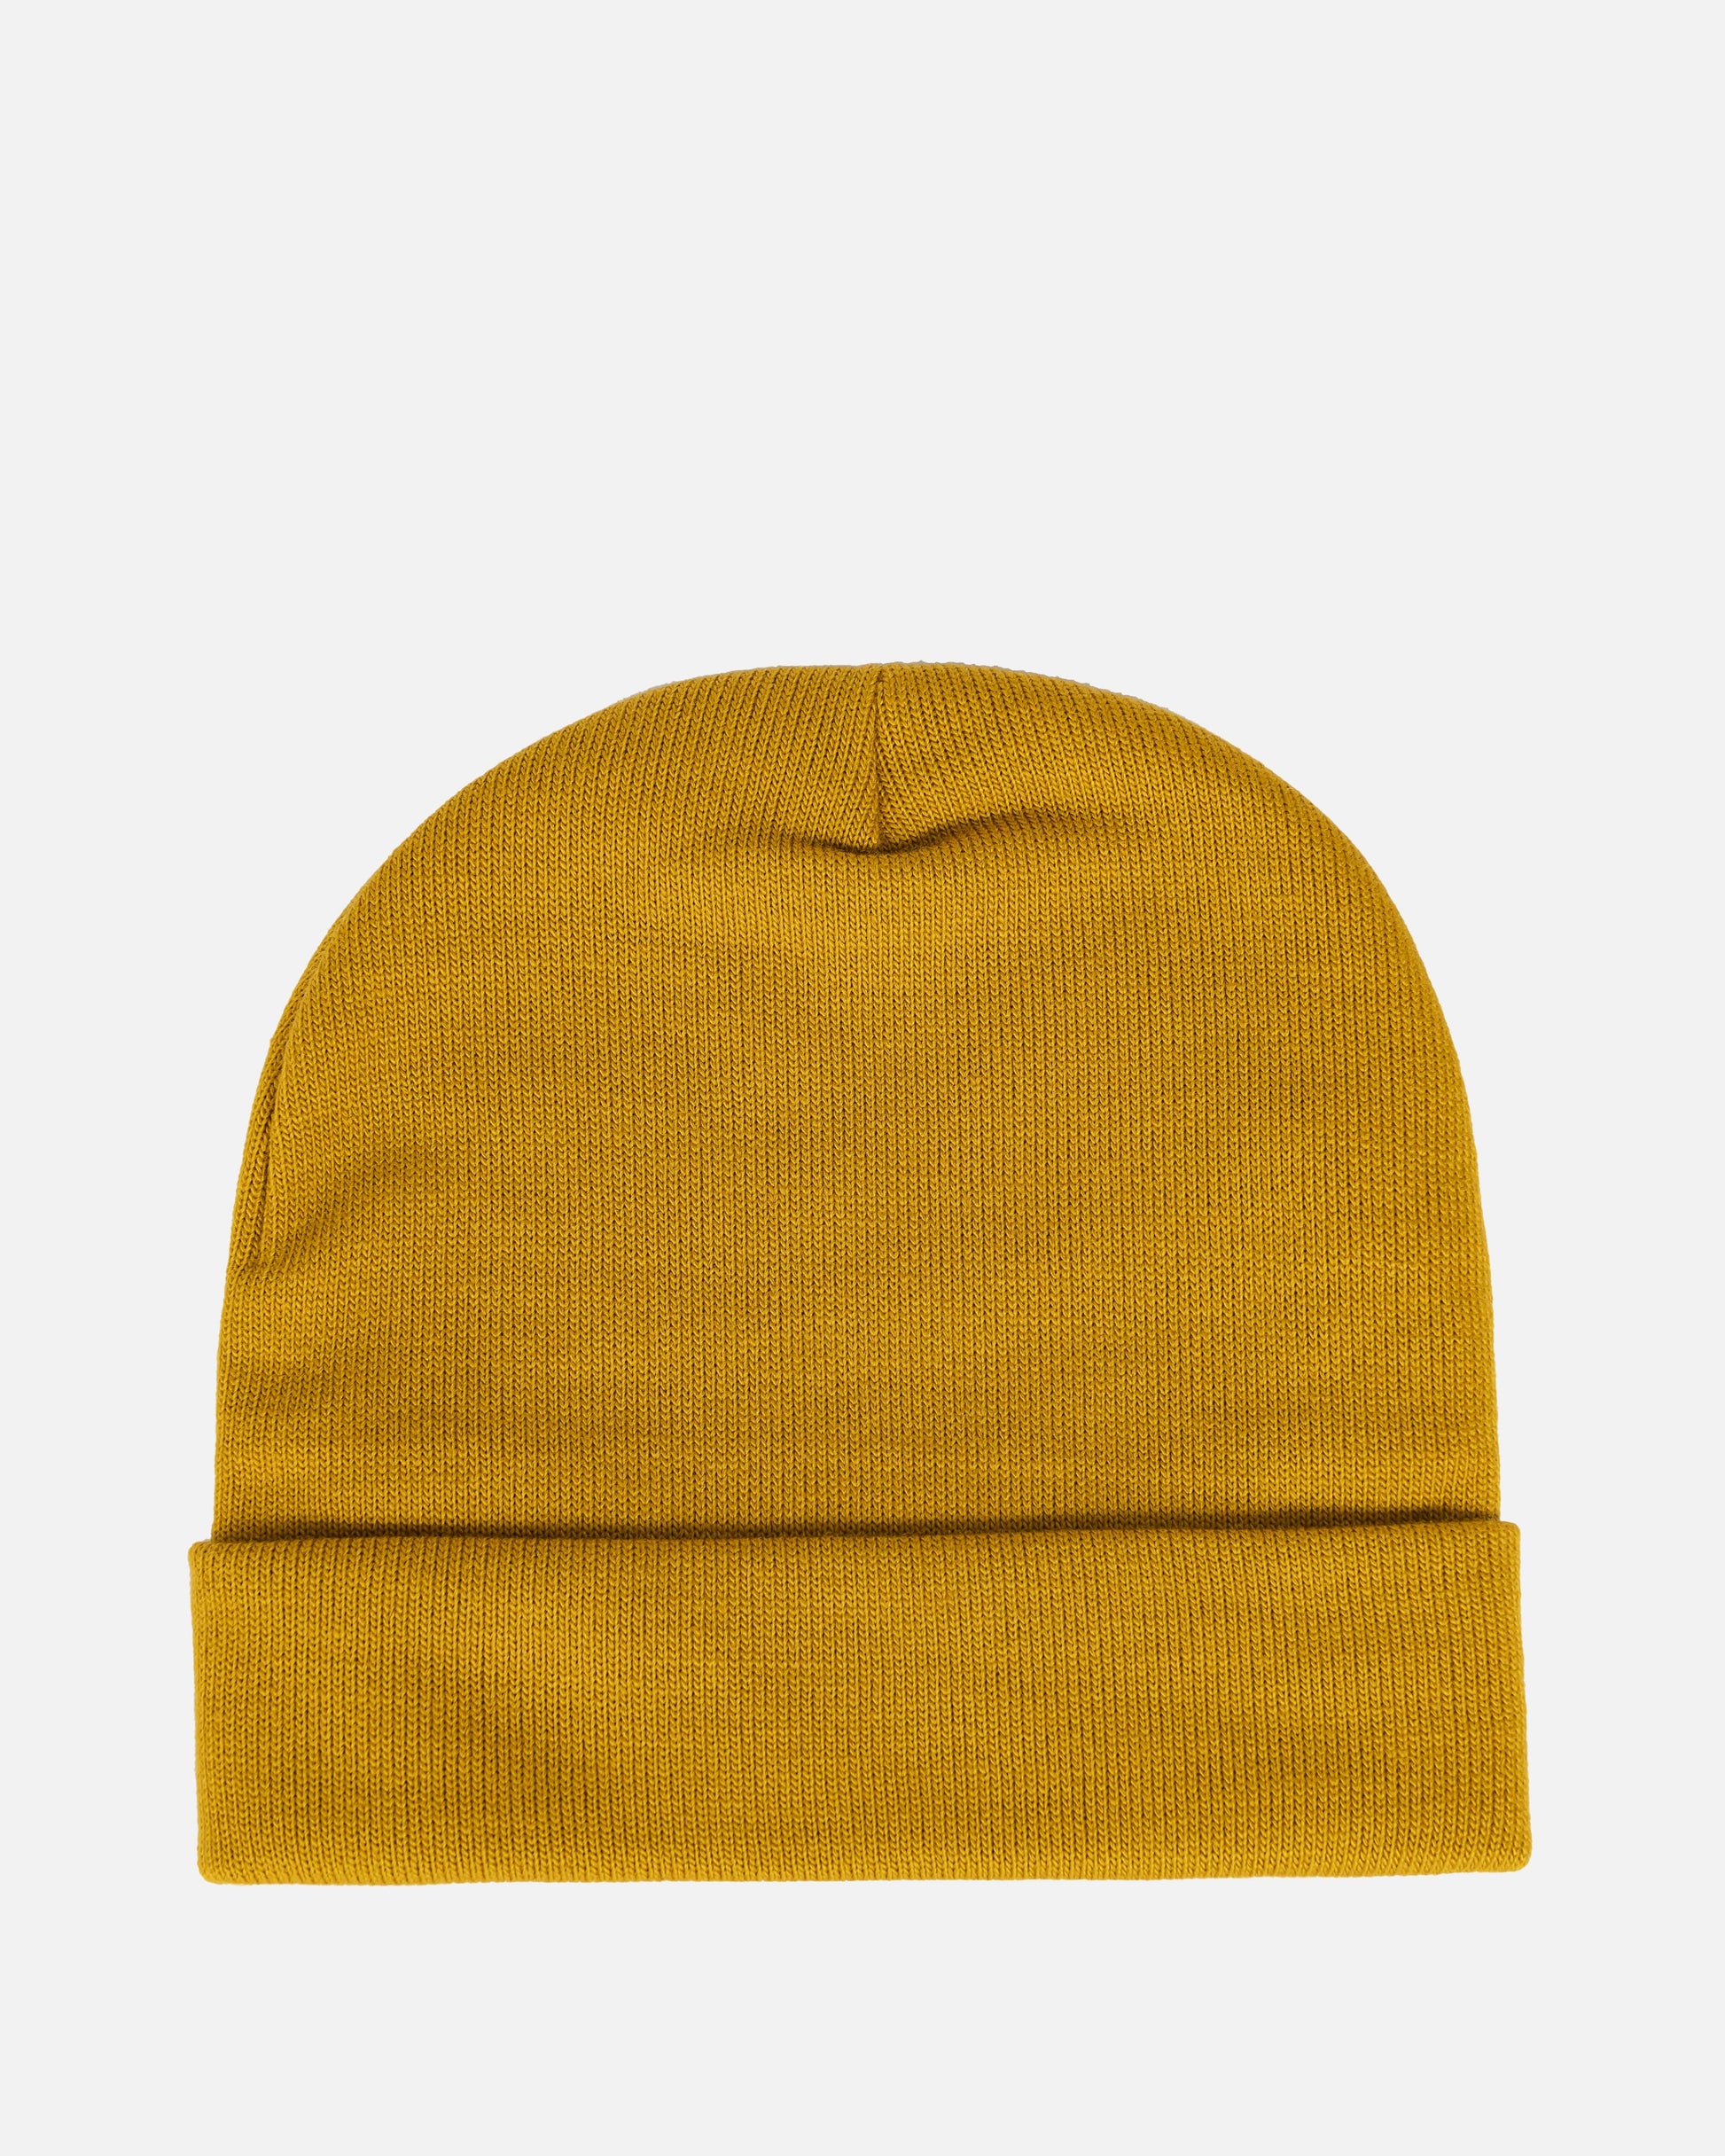 Aries Men's Hats No Problemo Beanie in Olive